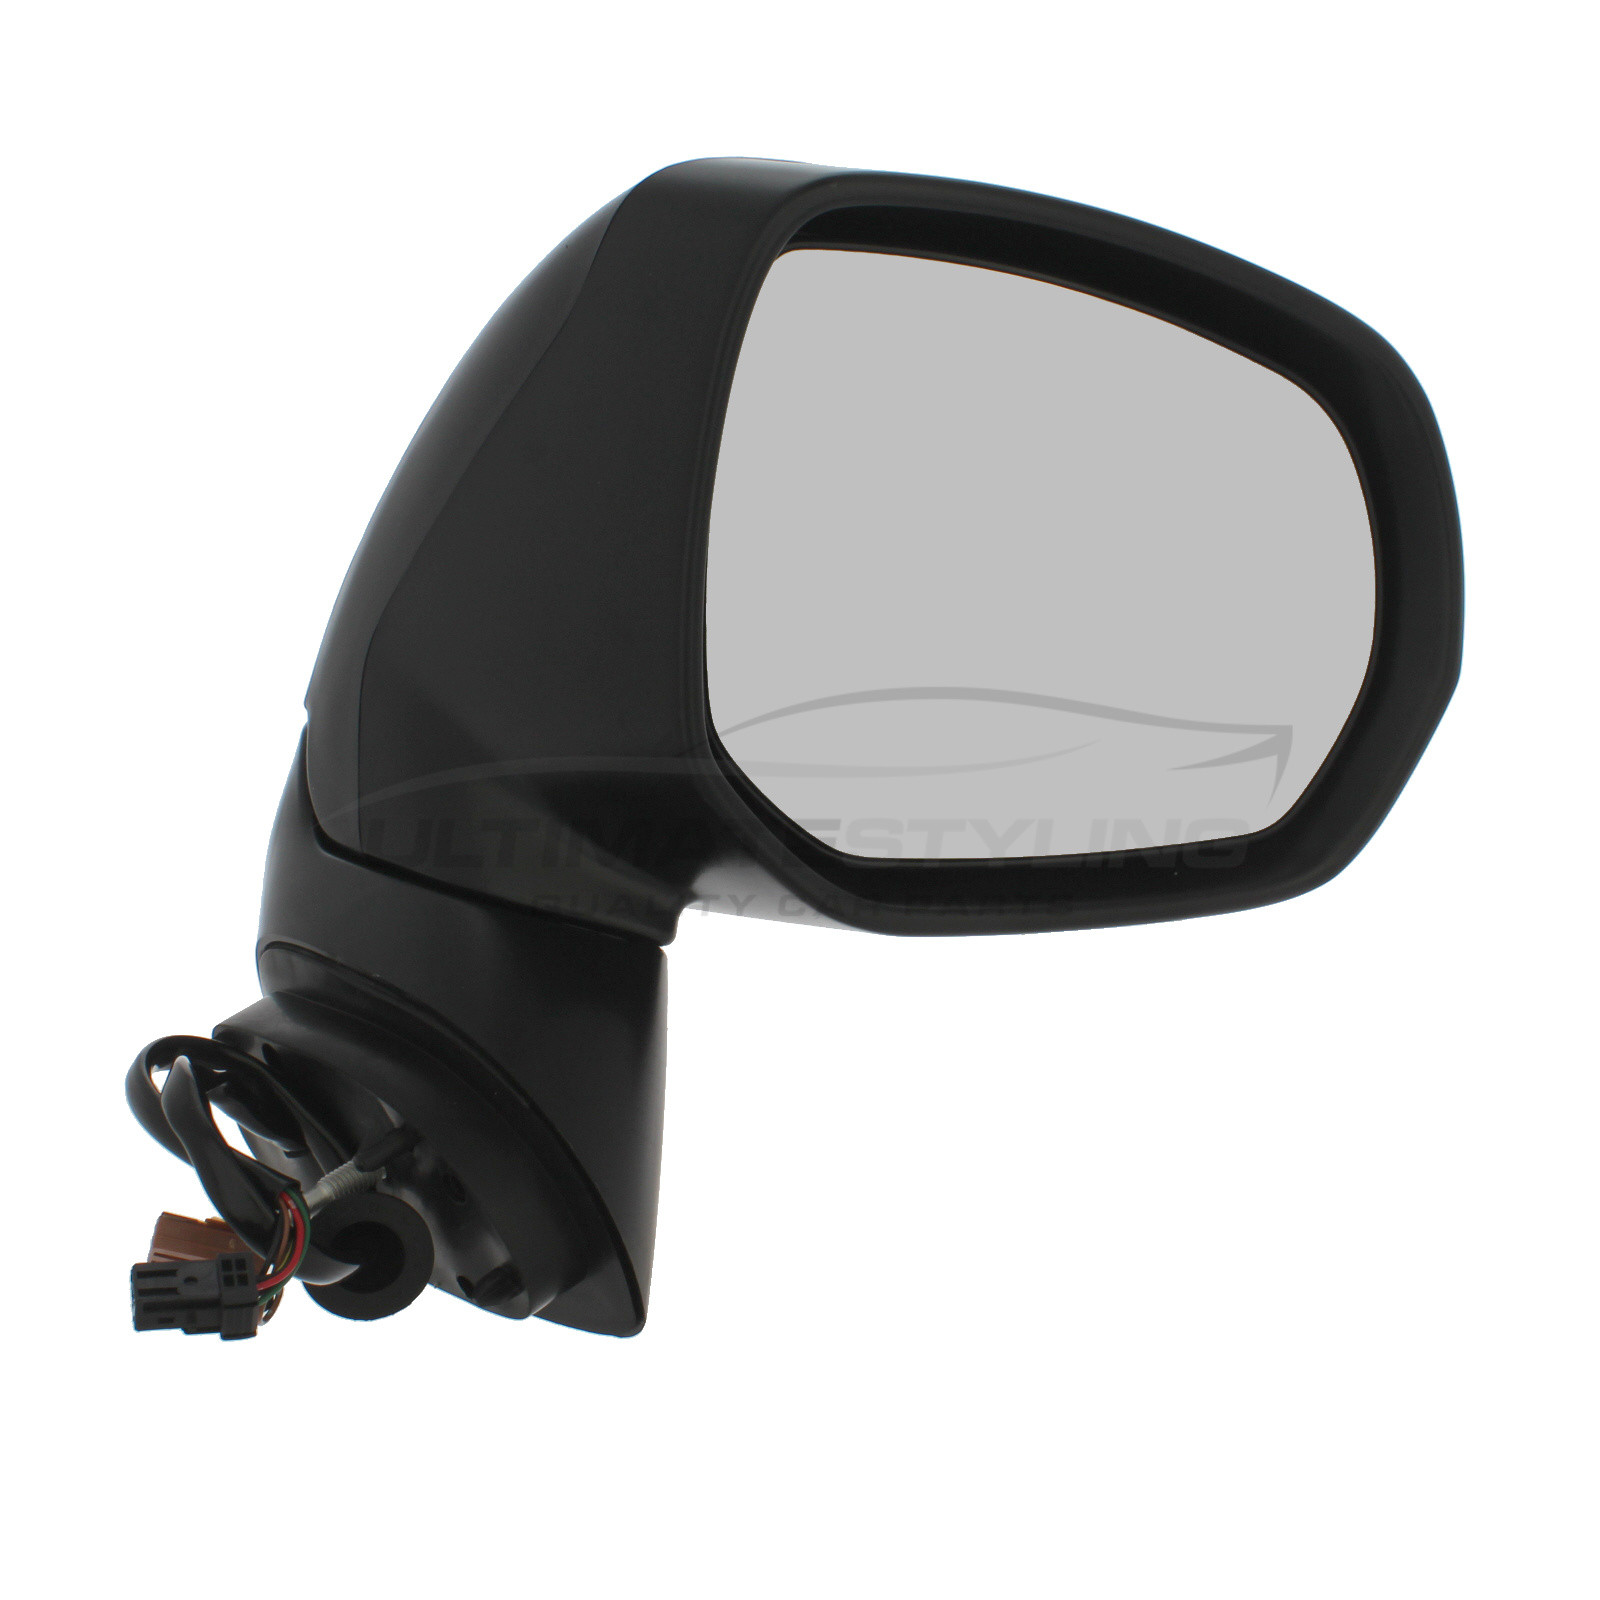 Citroen C3 Picasso Caravan Trailer Robust Extension Tow Wing Mirror Glass Single 